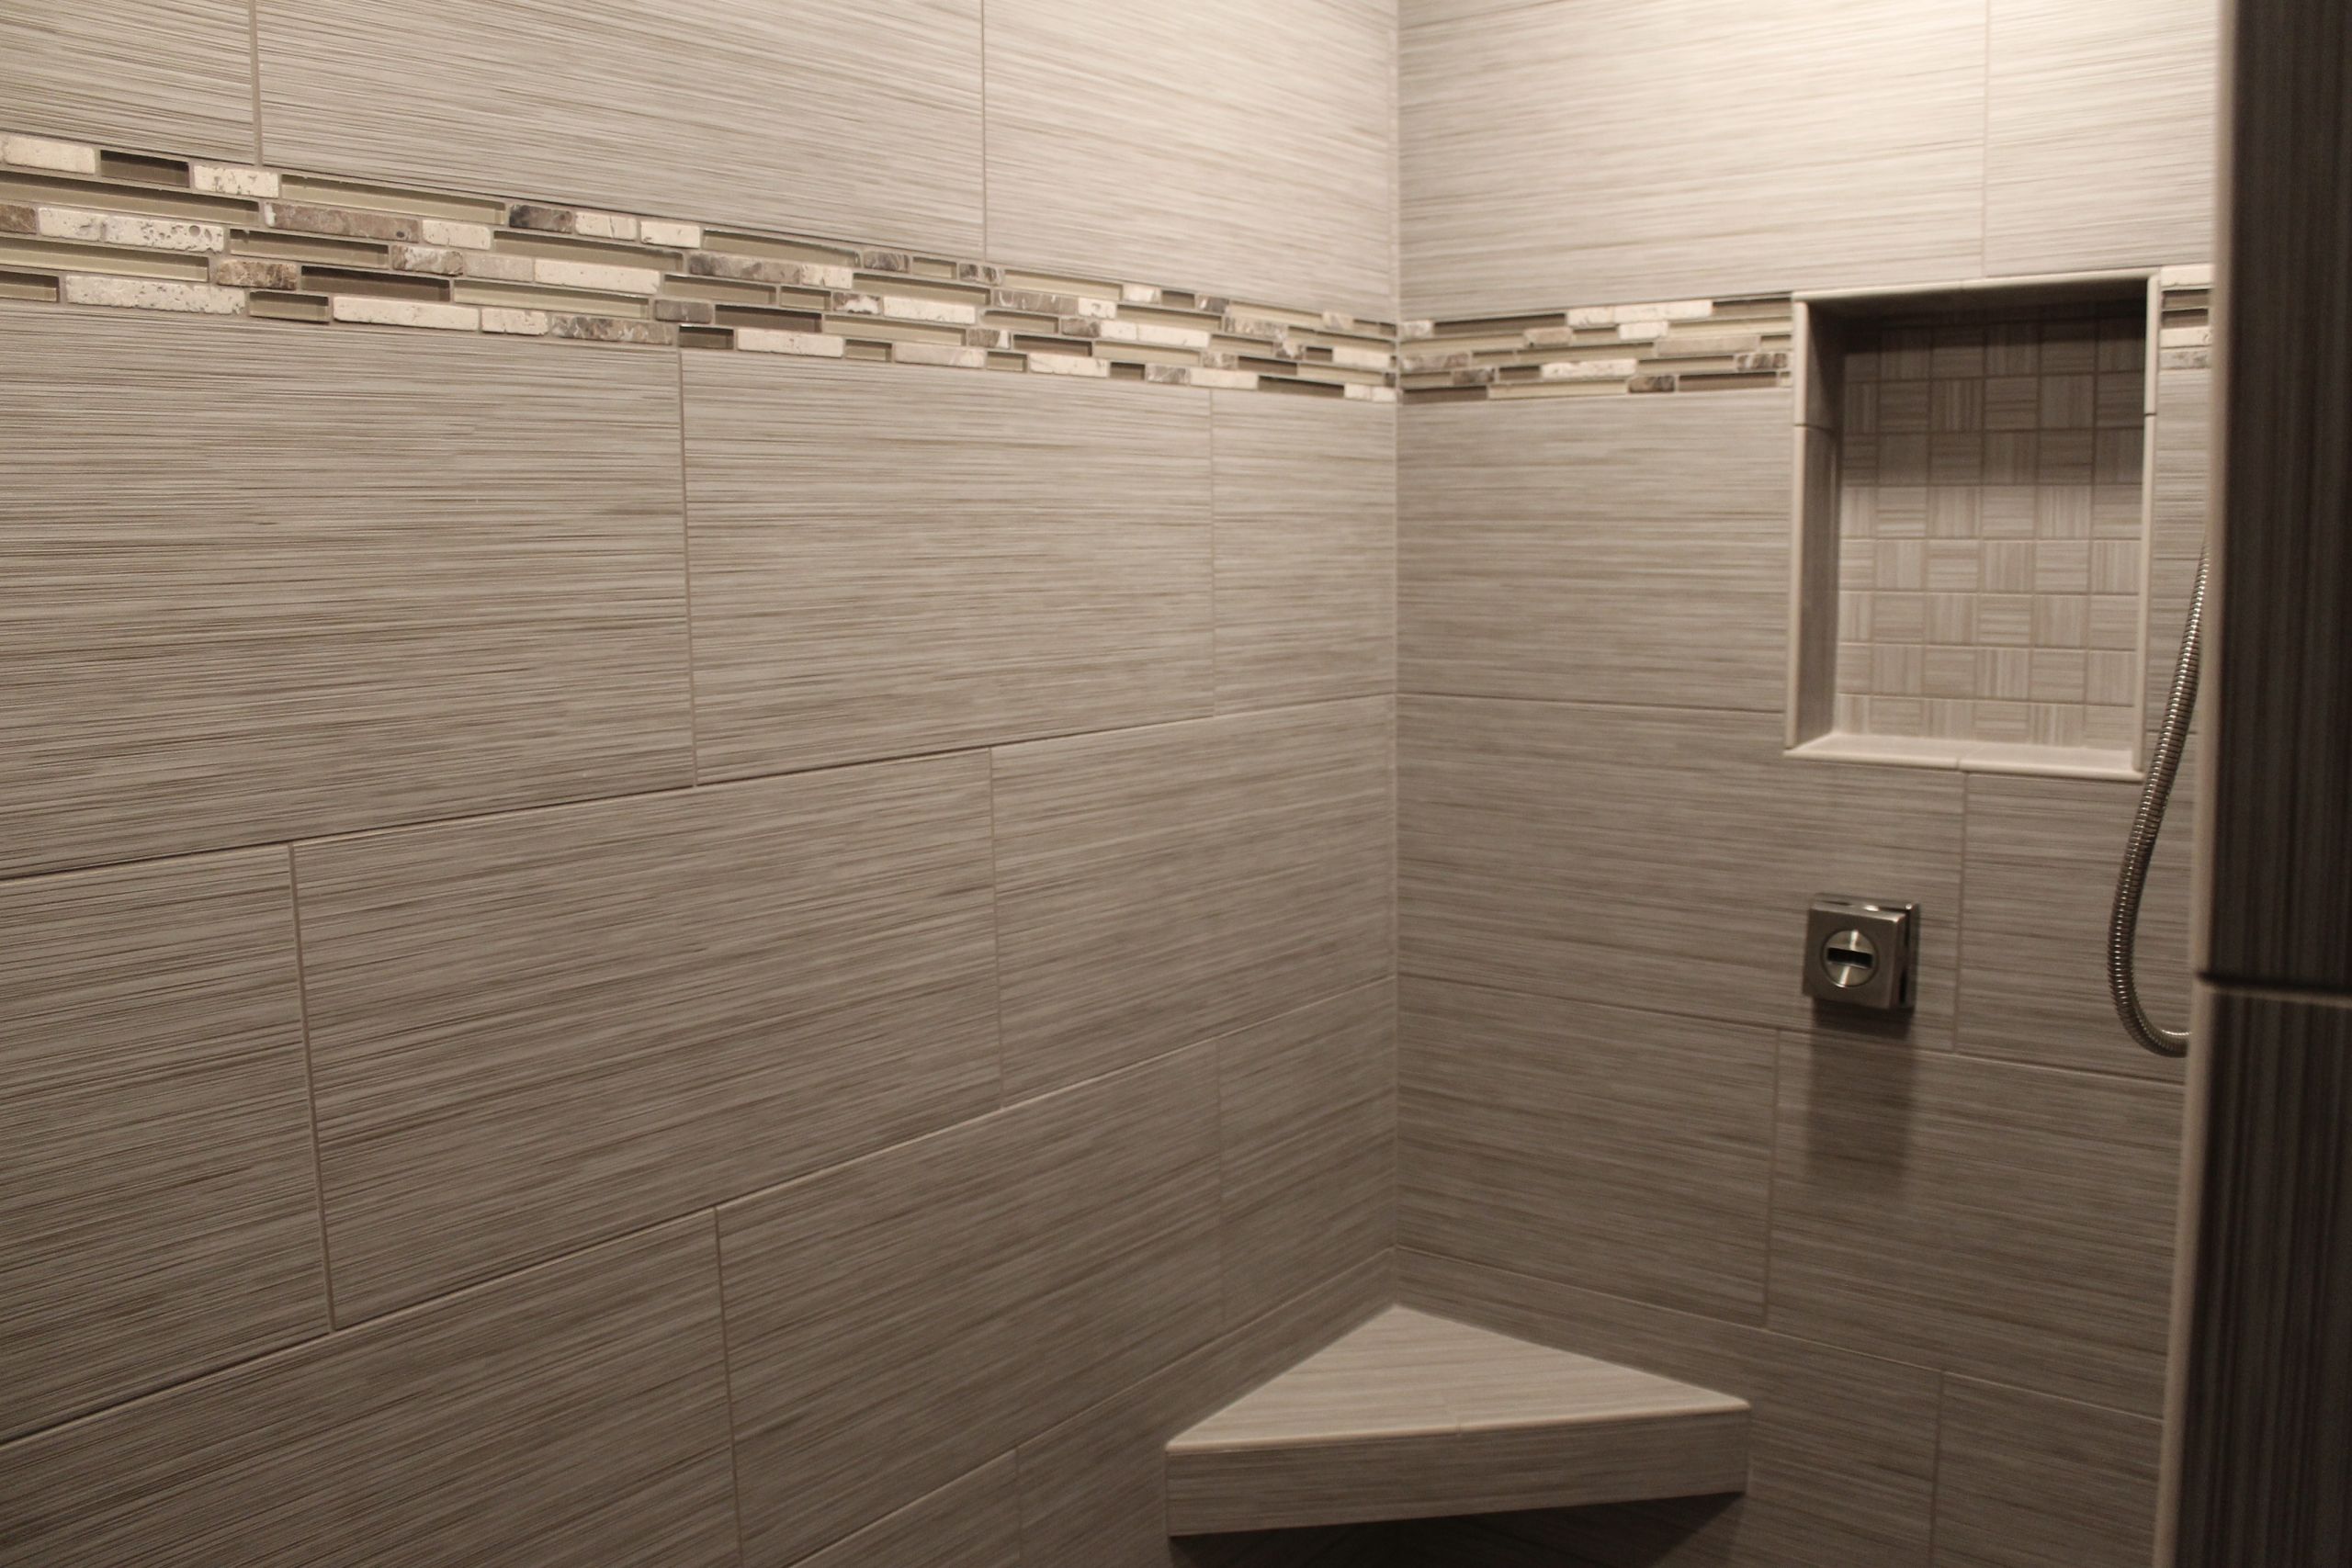 Bathroom Tile Wall
 What’s Hot in Tile Showers right now and other flooring